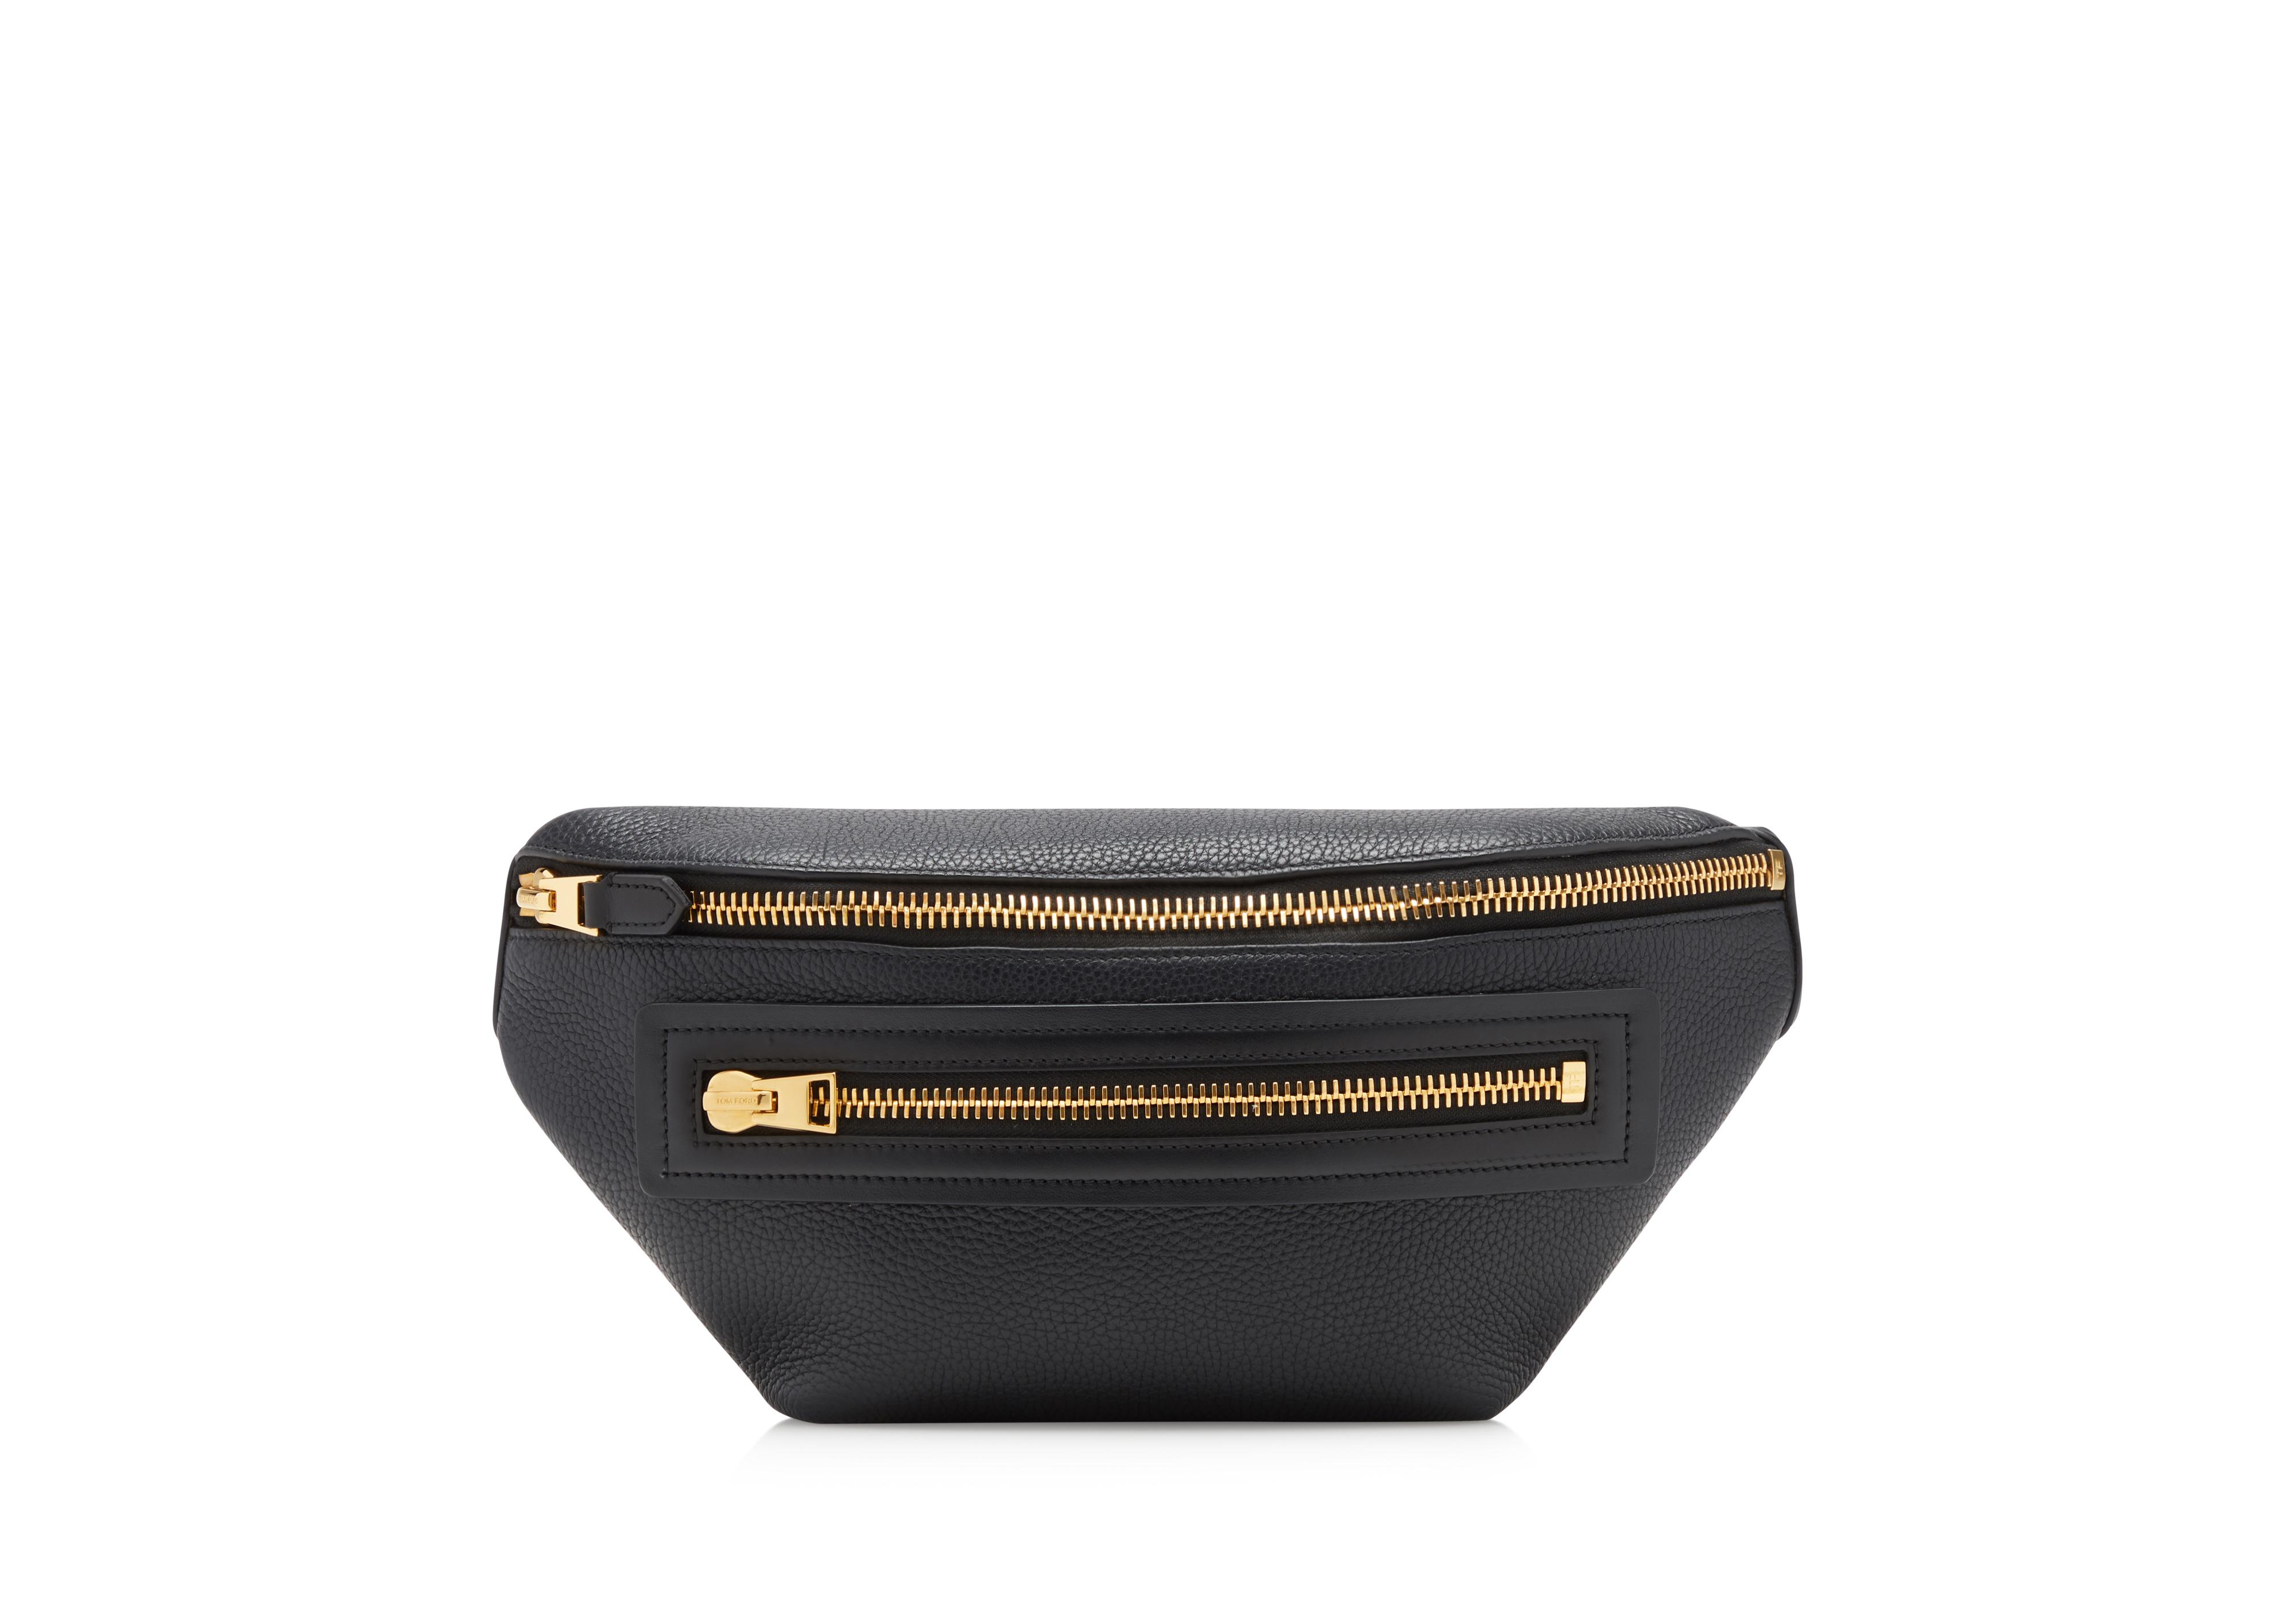 Actualizar 82+ imagen tom ford fanny pack